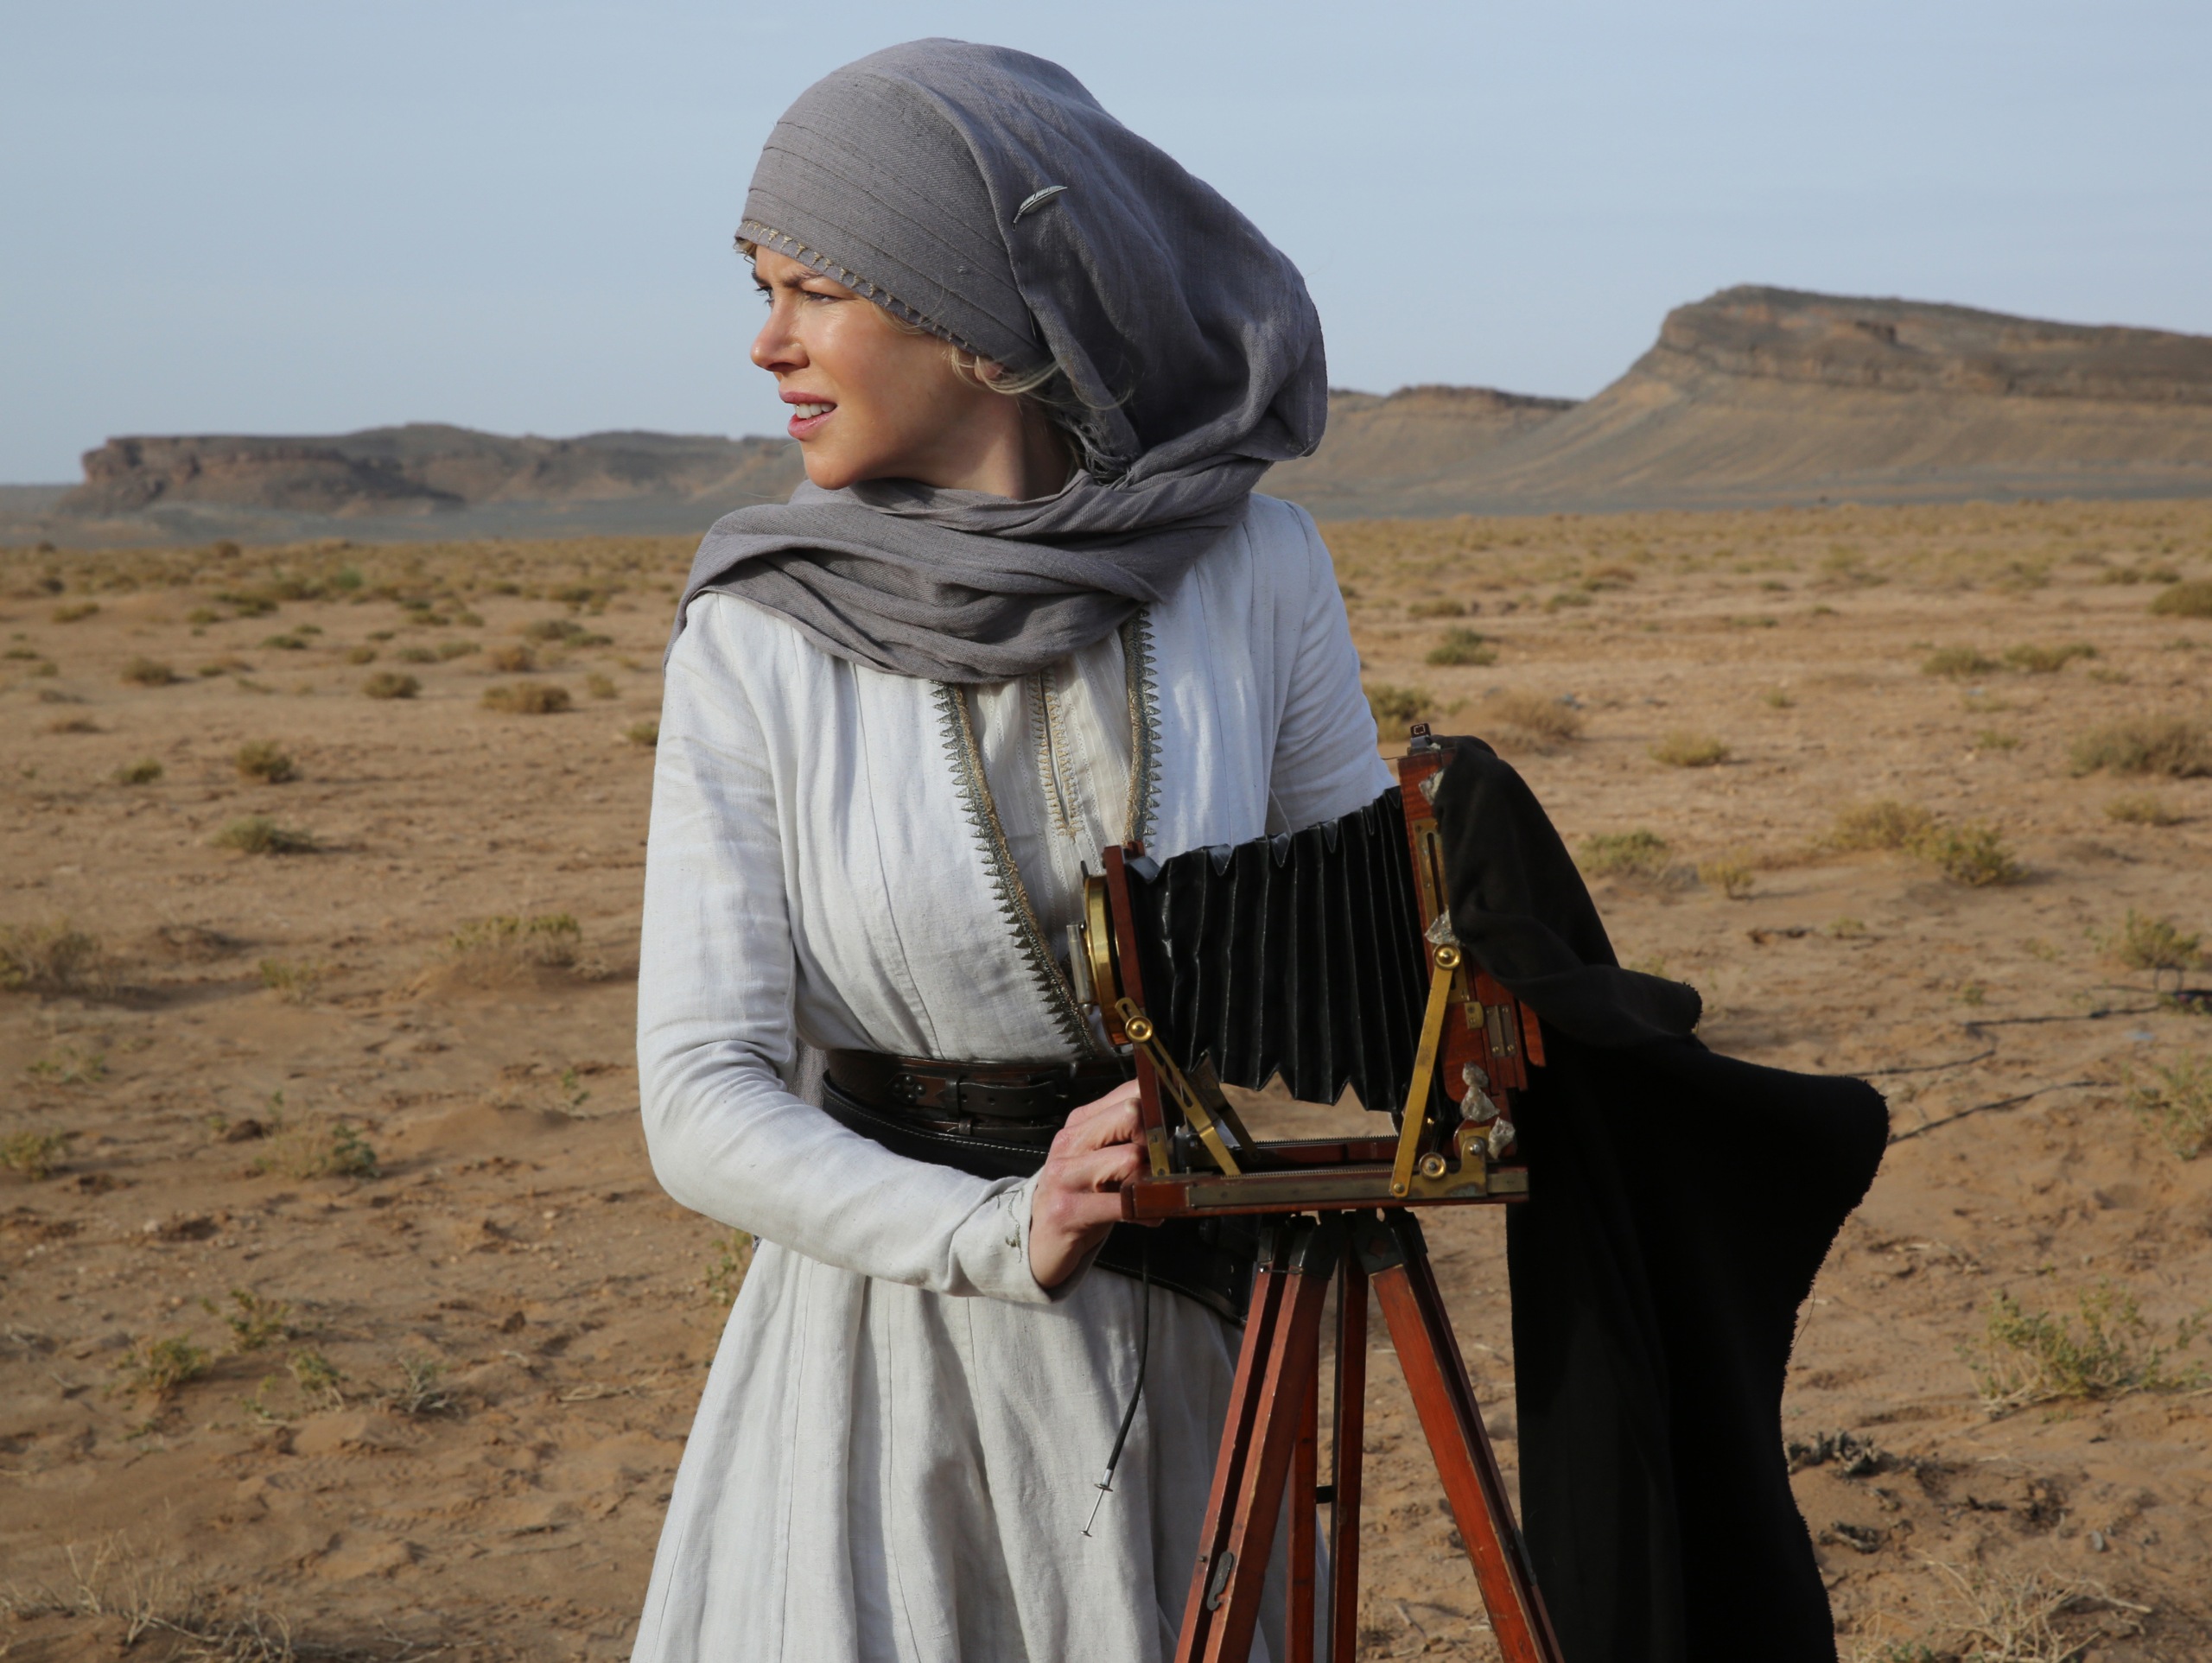 A woman in a white dress with a gray headscarf stands in a desert next to an old photo camera and looks to the left into the distance.